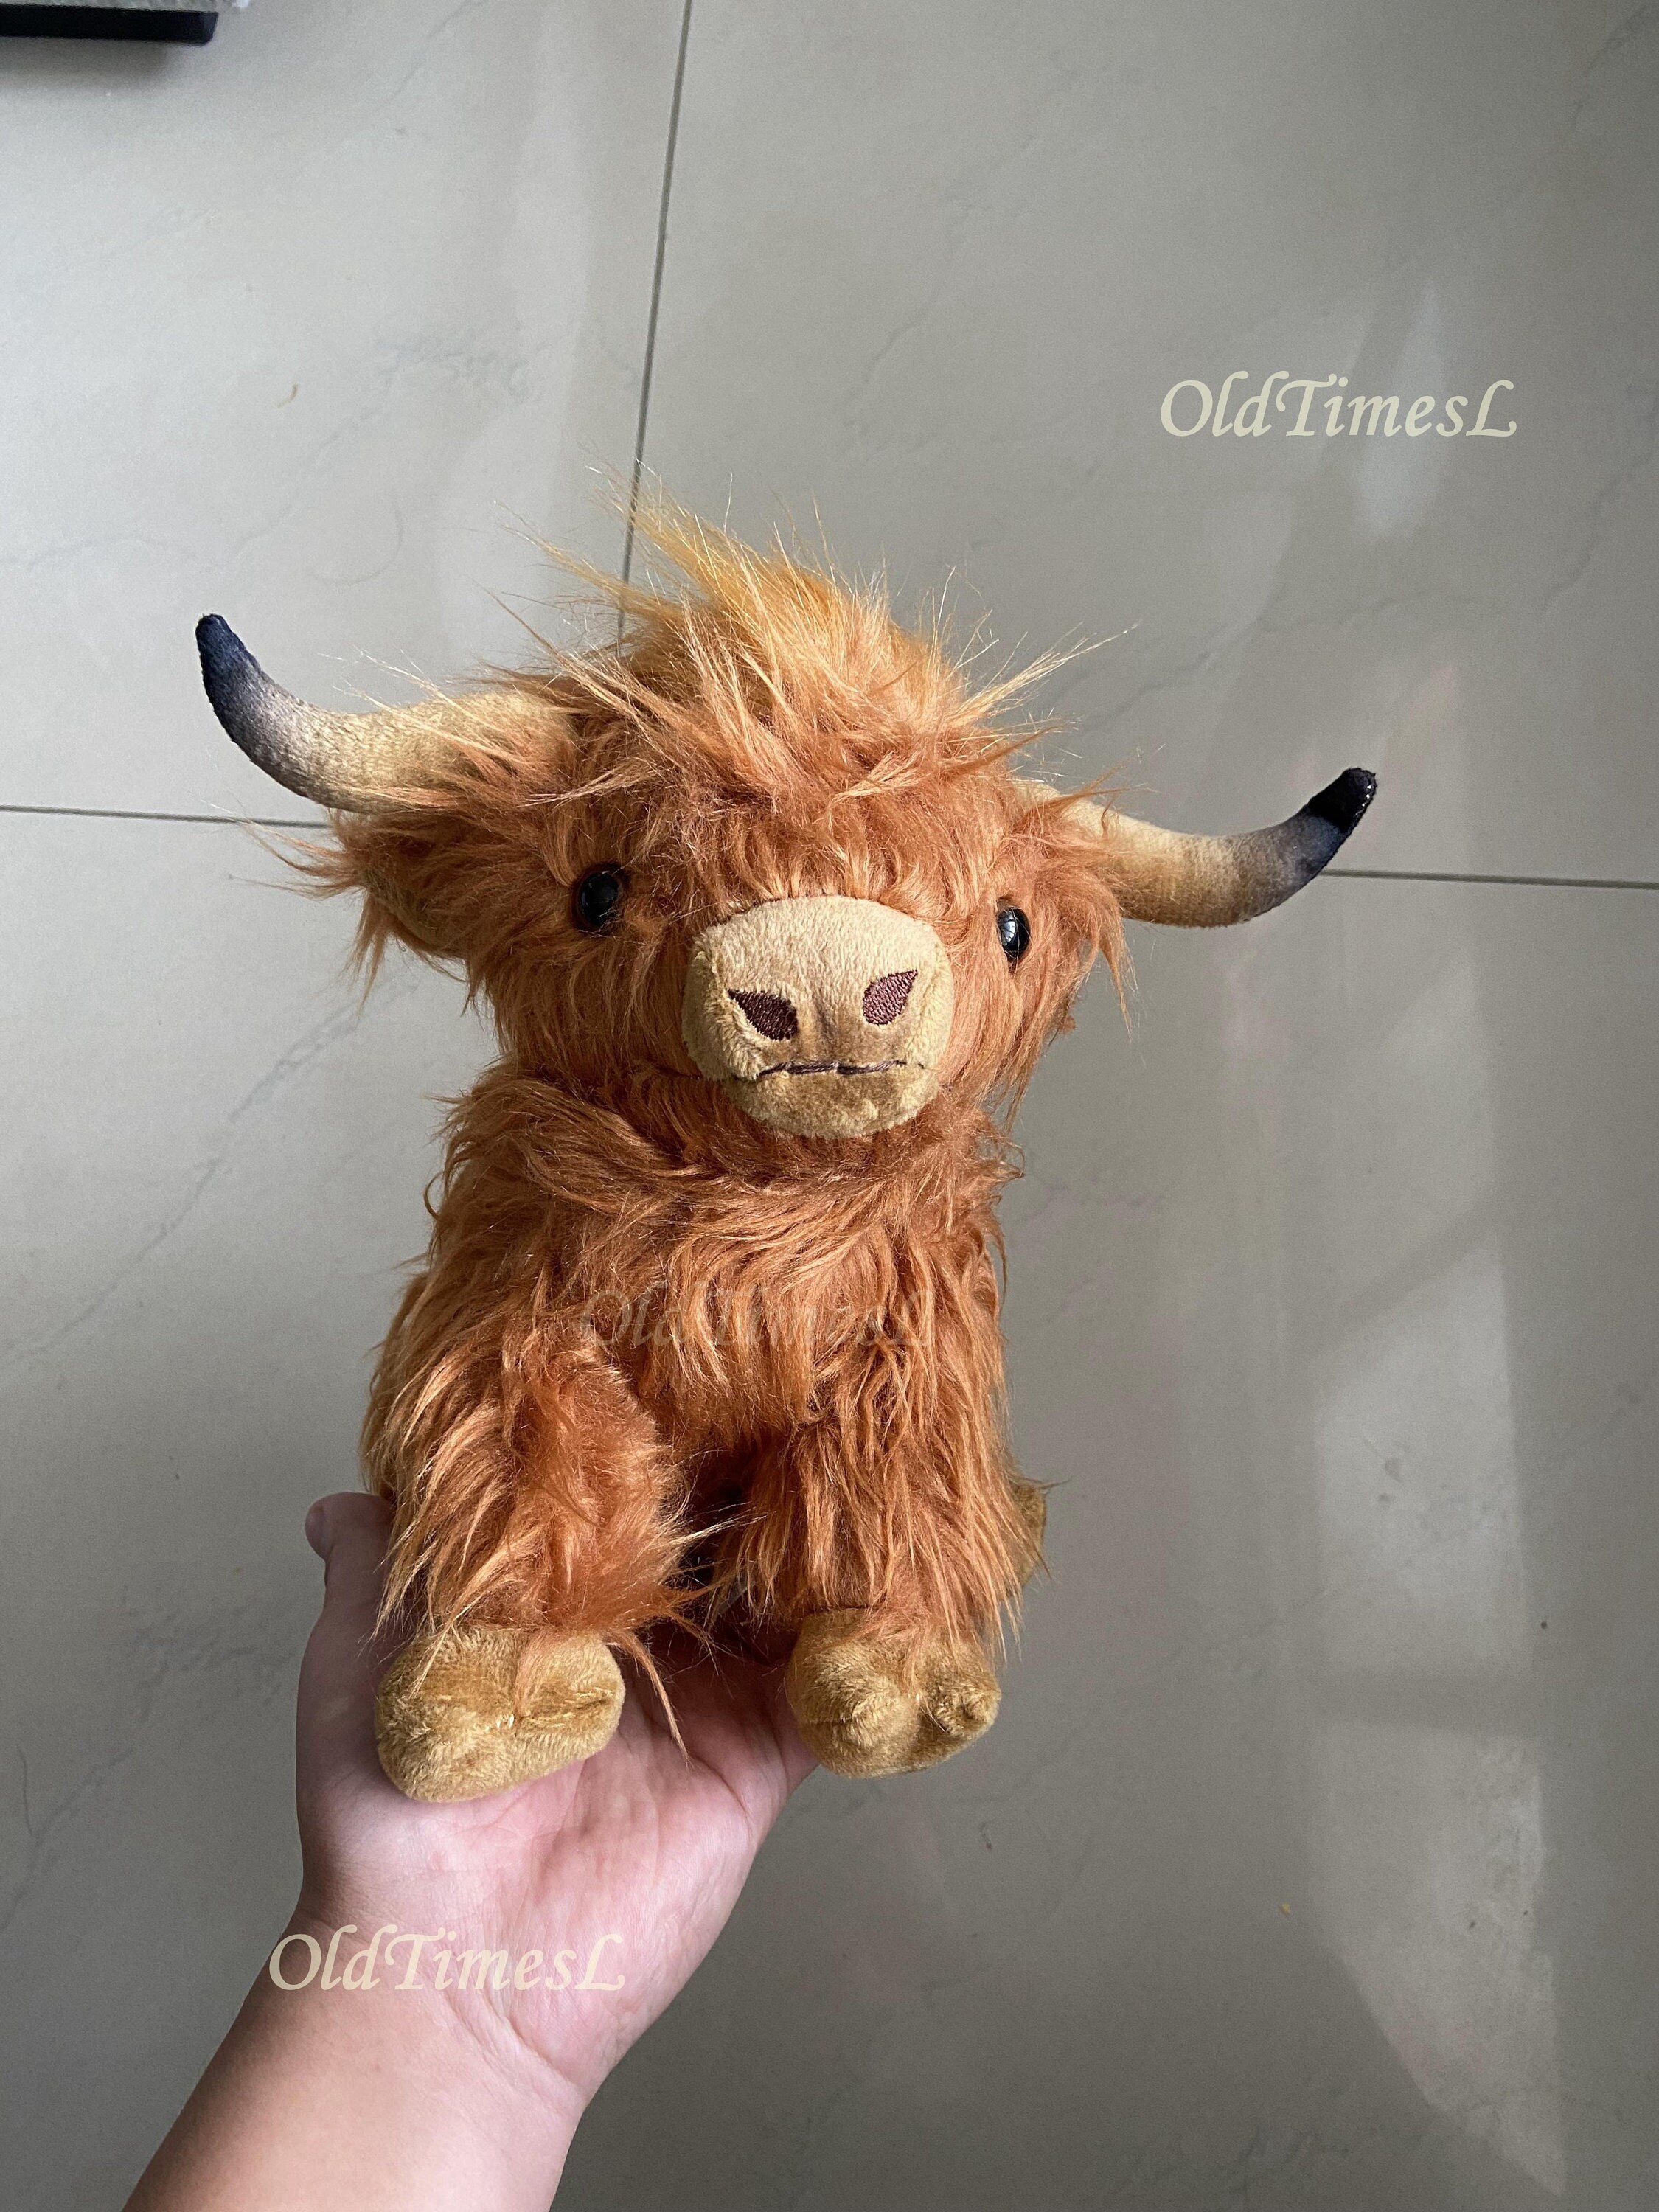 NEW year 2023 Highlands Cow Yak Animal Plush Soft Stuffed Plush Cow Toy For  Kids